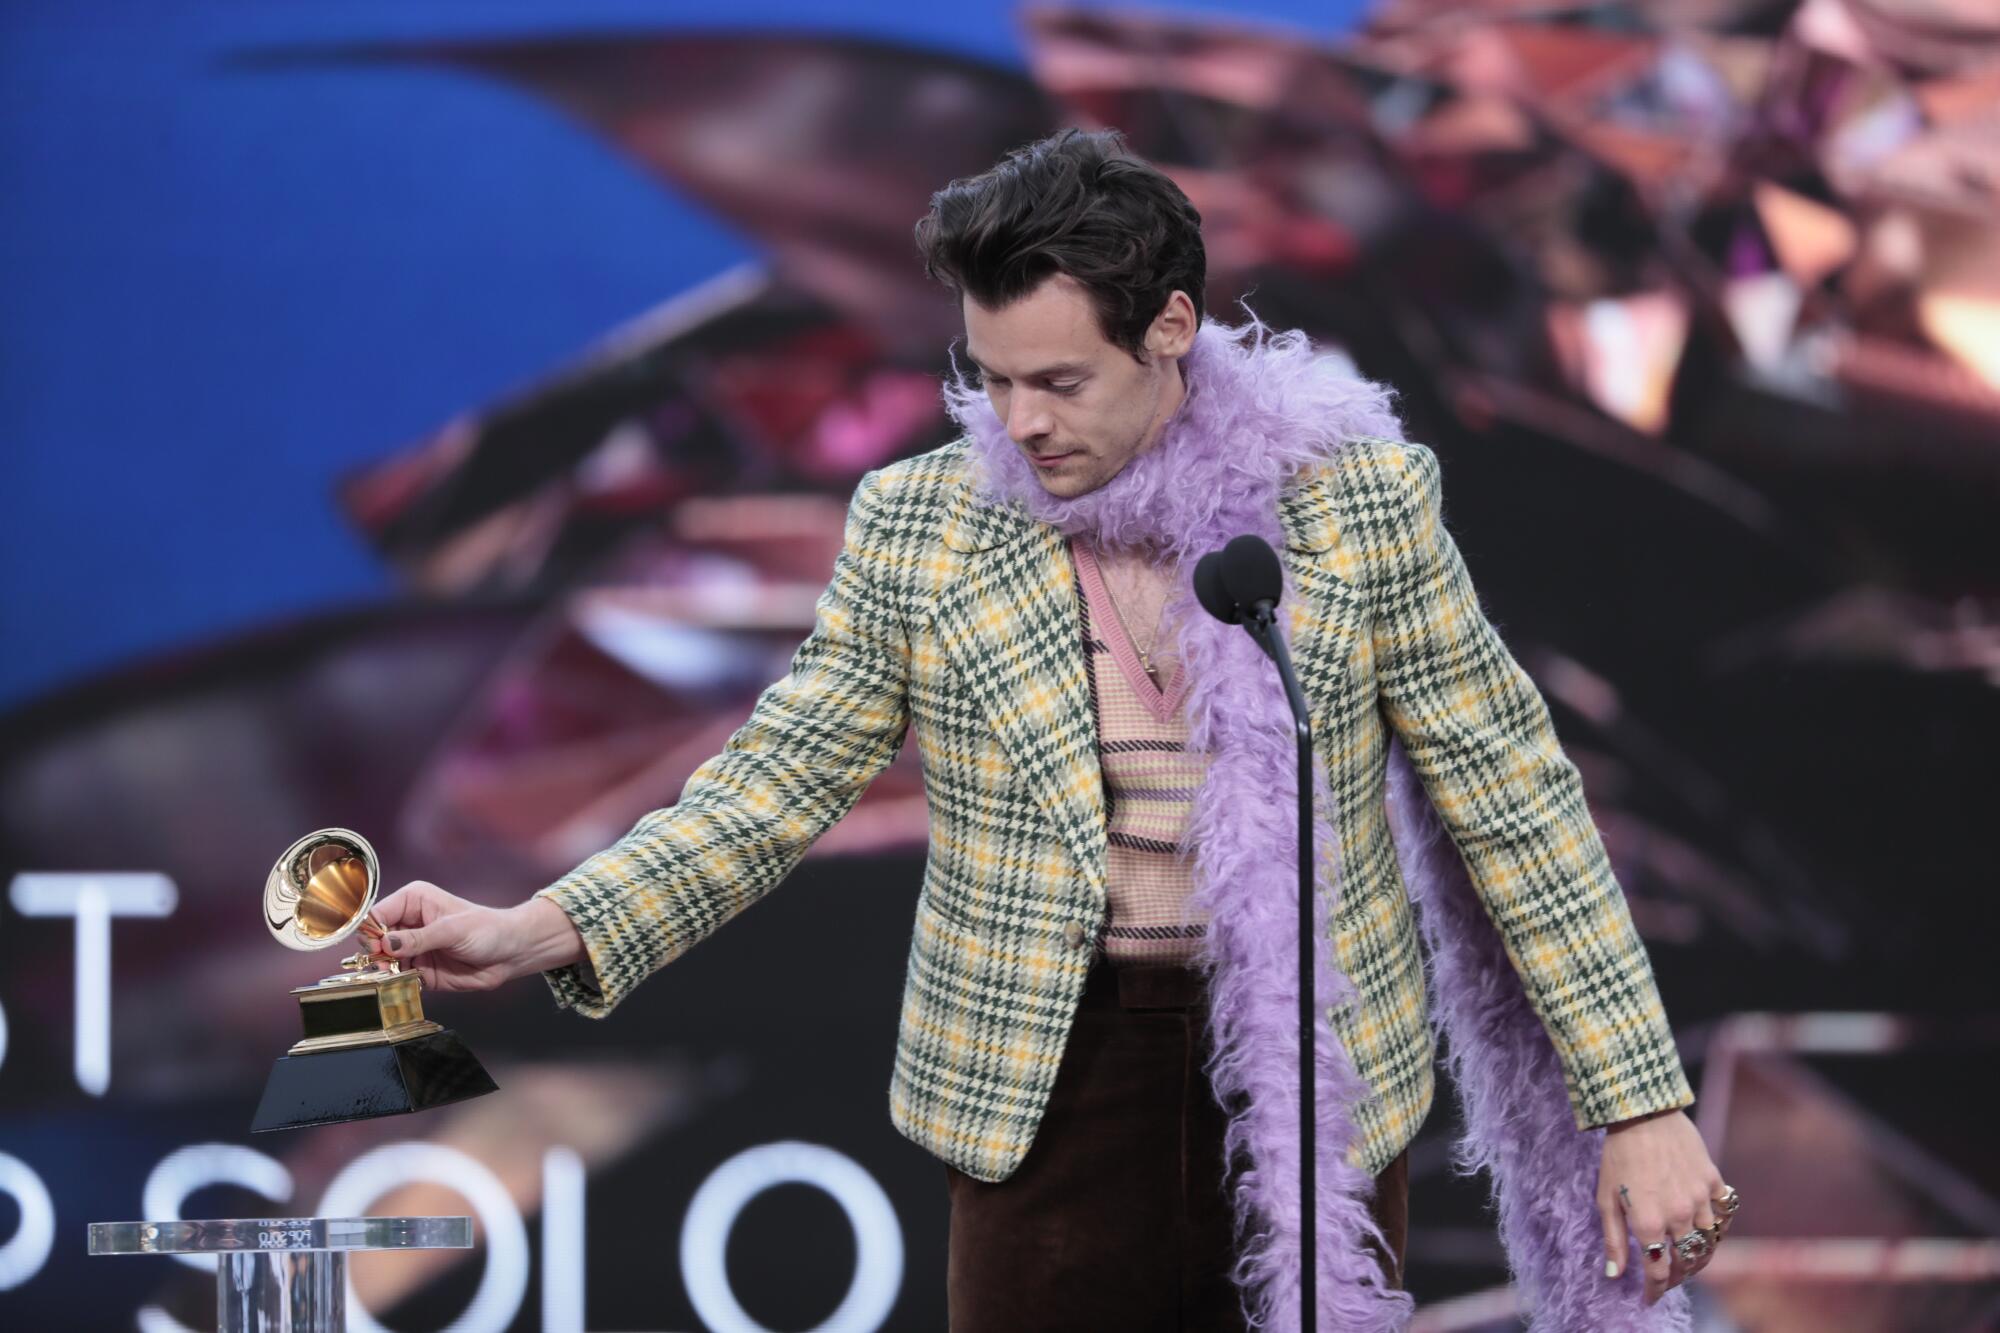 Harry Styles accepts the award for pop solo performance at the 63rd Grammy Awards.